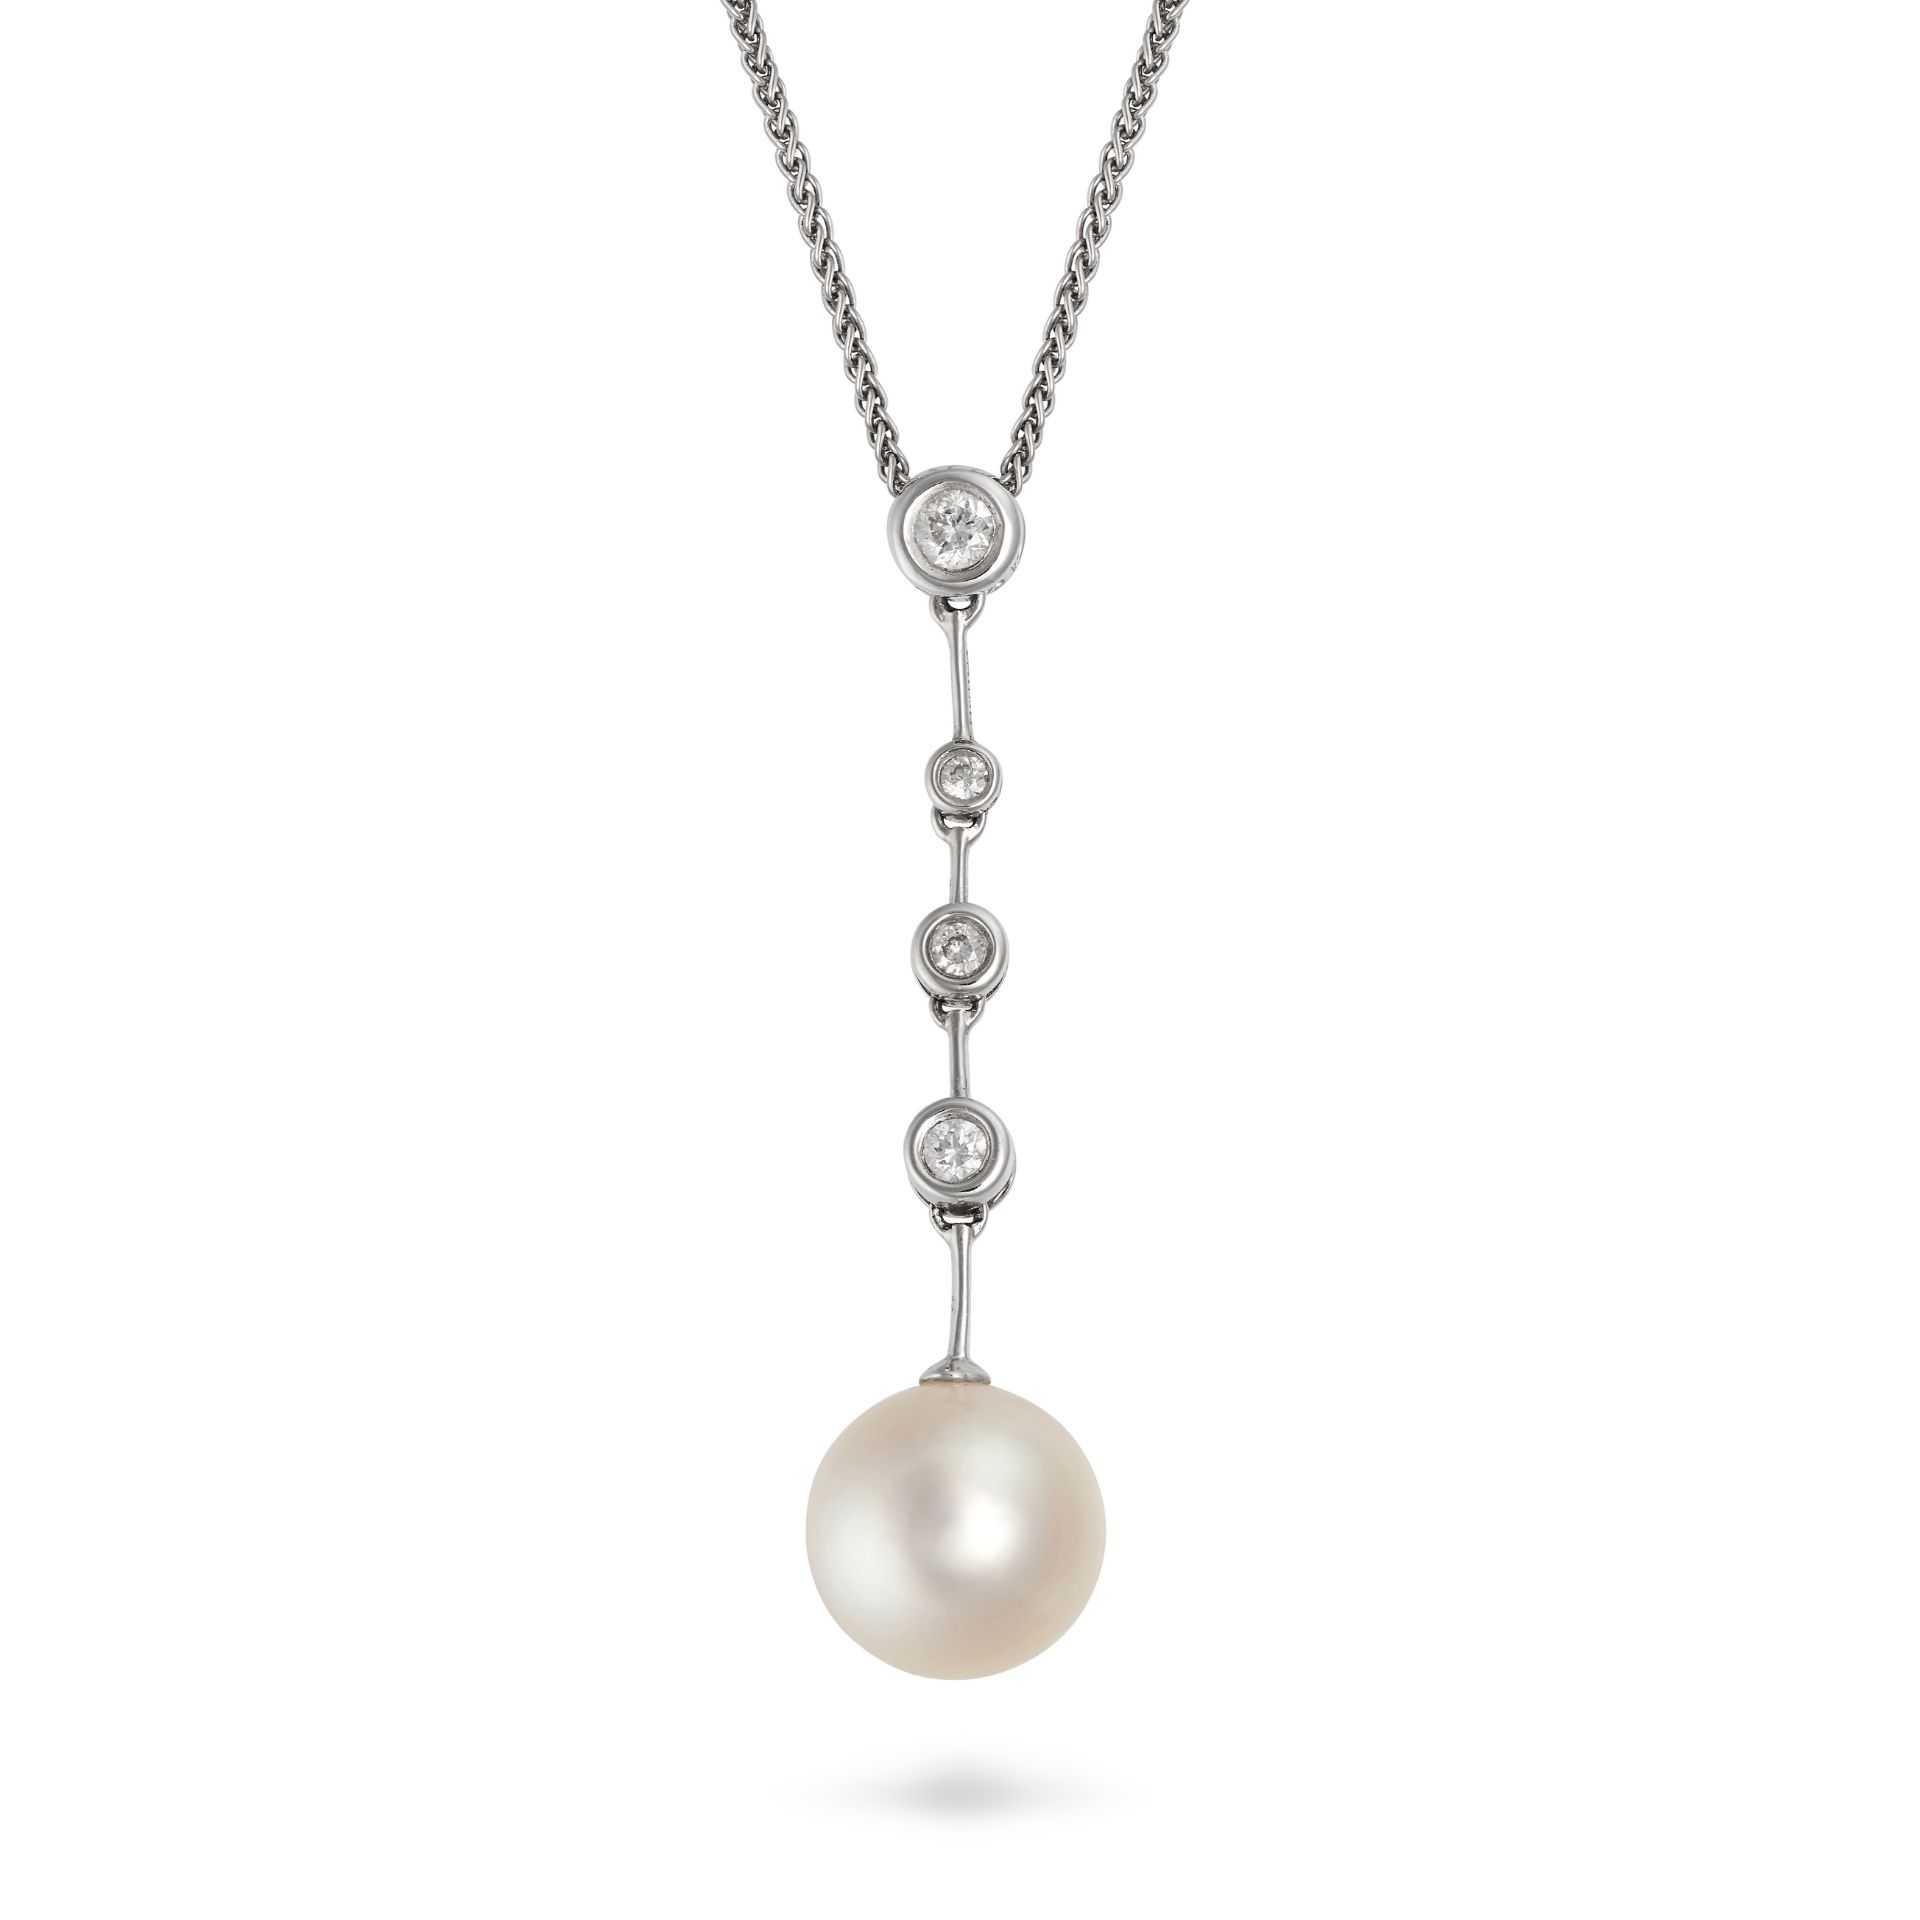 NO RESERVE - A DIAMOND AND PEARL PENDANT NECKLACE in 18ct white gold, the pendant comprising a ro...